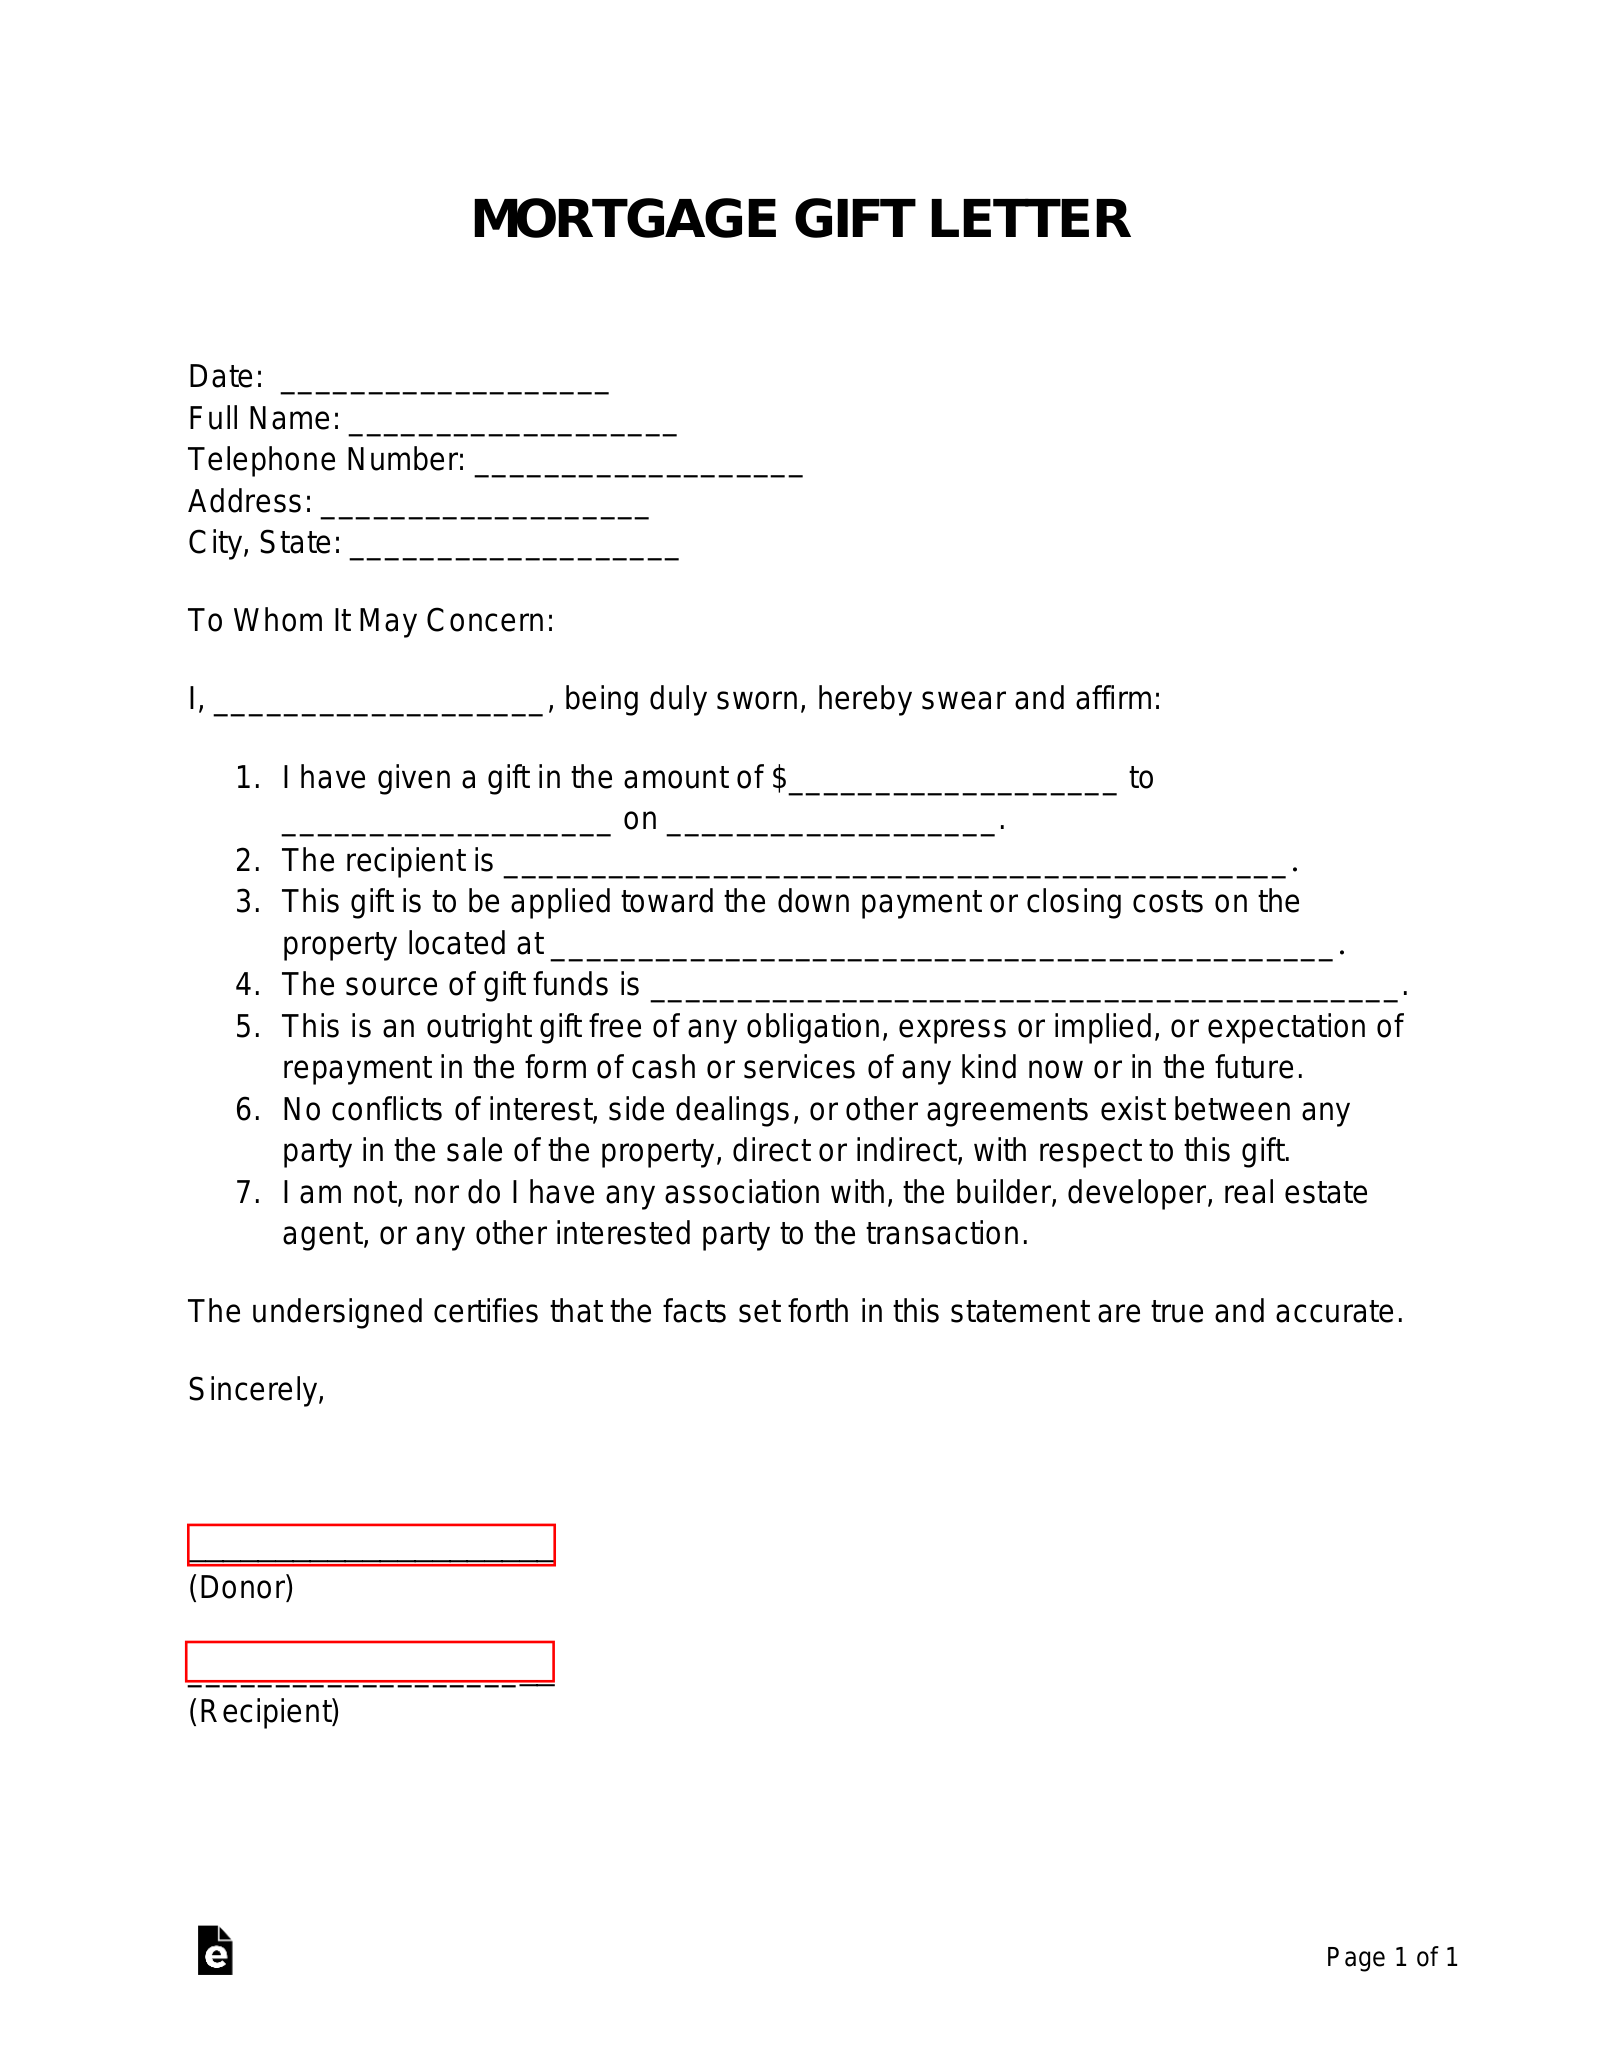 Mortgage gift letter template: Fill out & sign online | DocHub